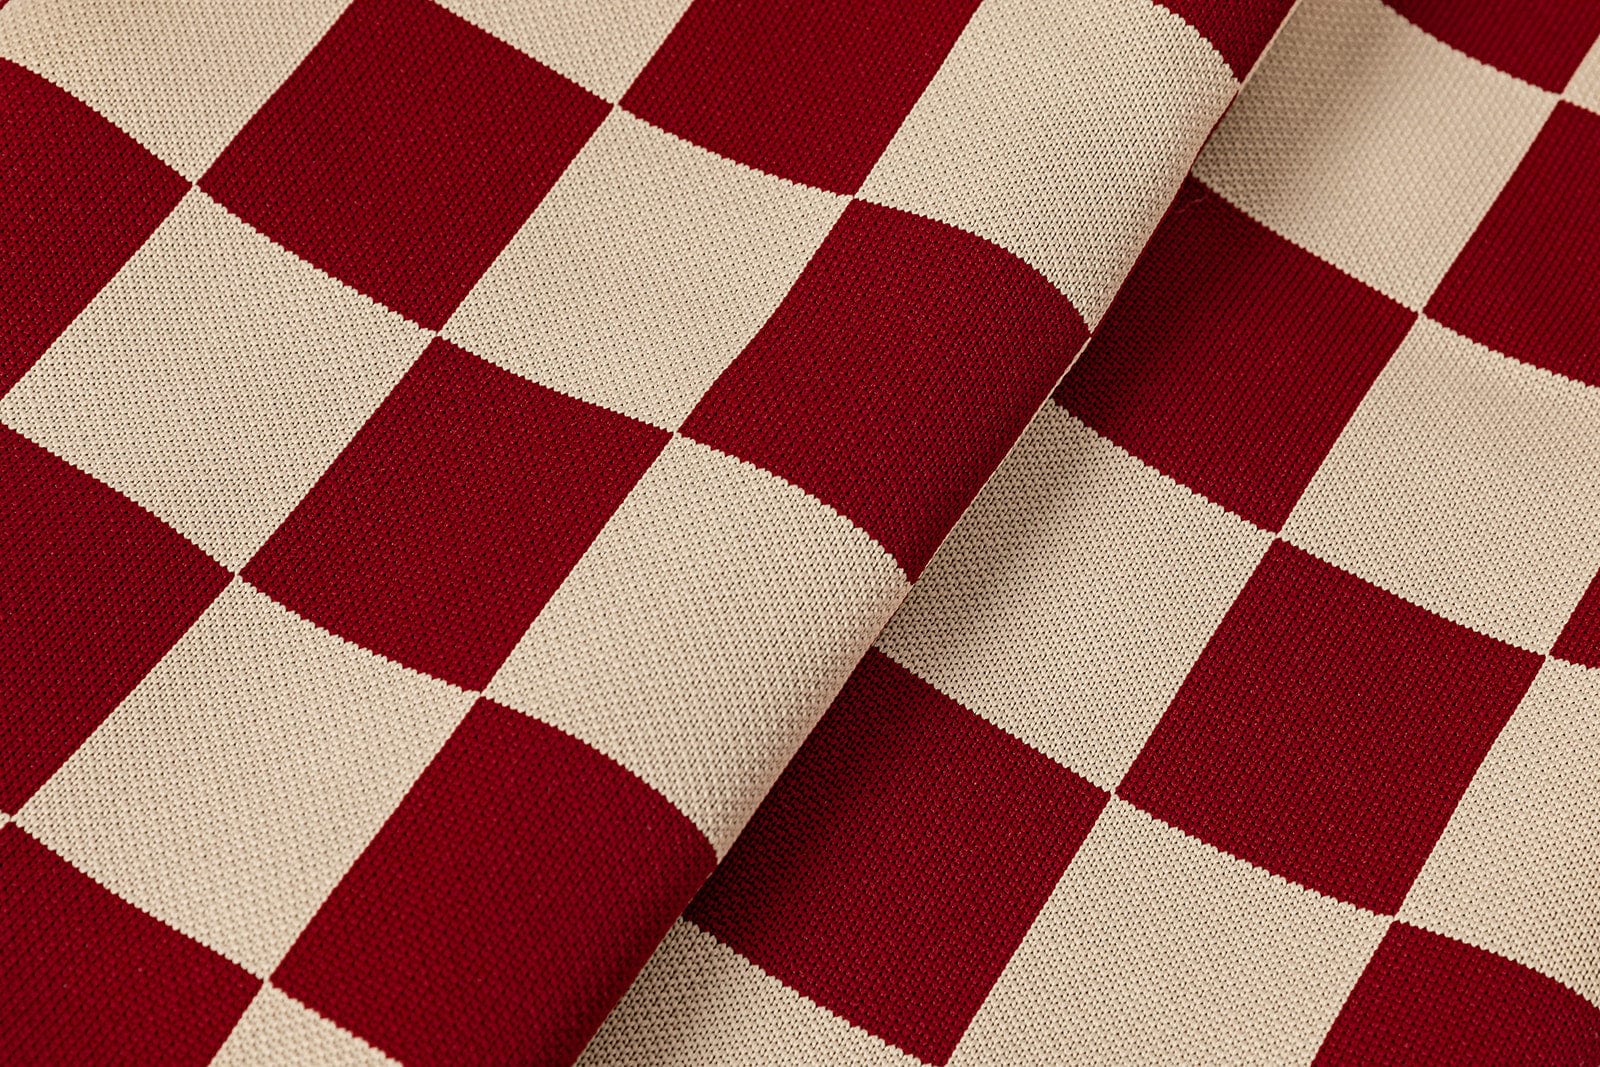 LAY LO™ Pets LAY LO Pets - Red Checker Dog Bed or Bed Cover Lay Lo Pets